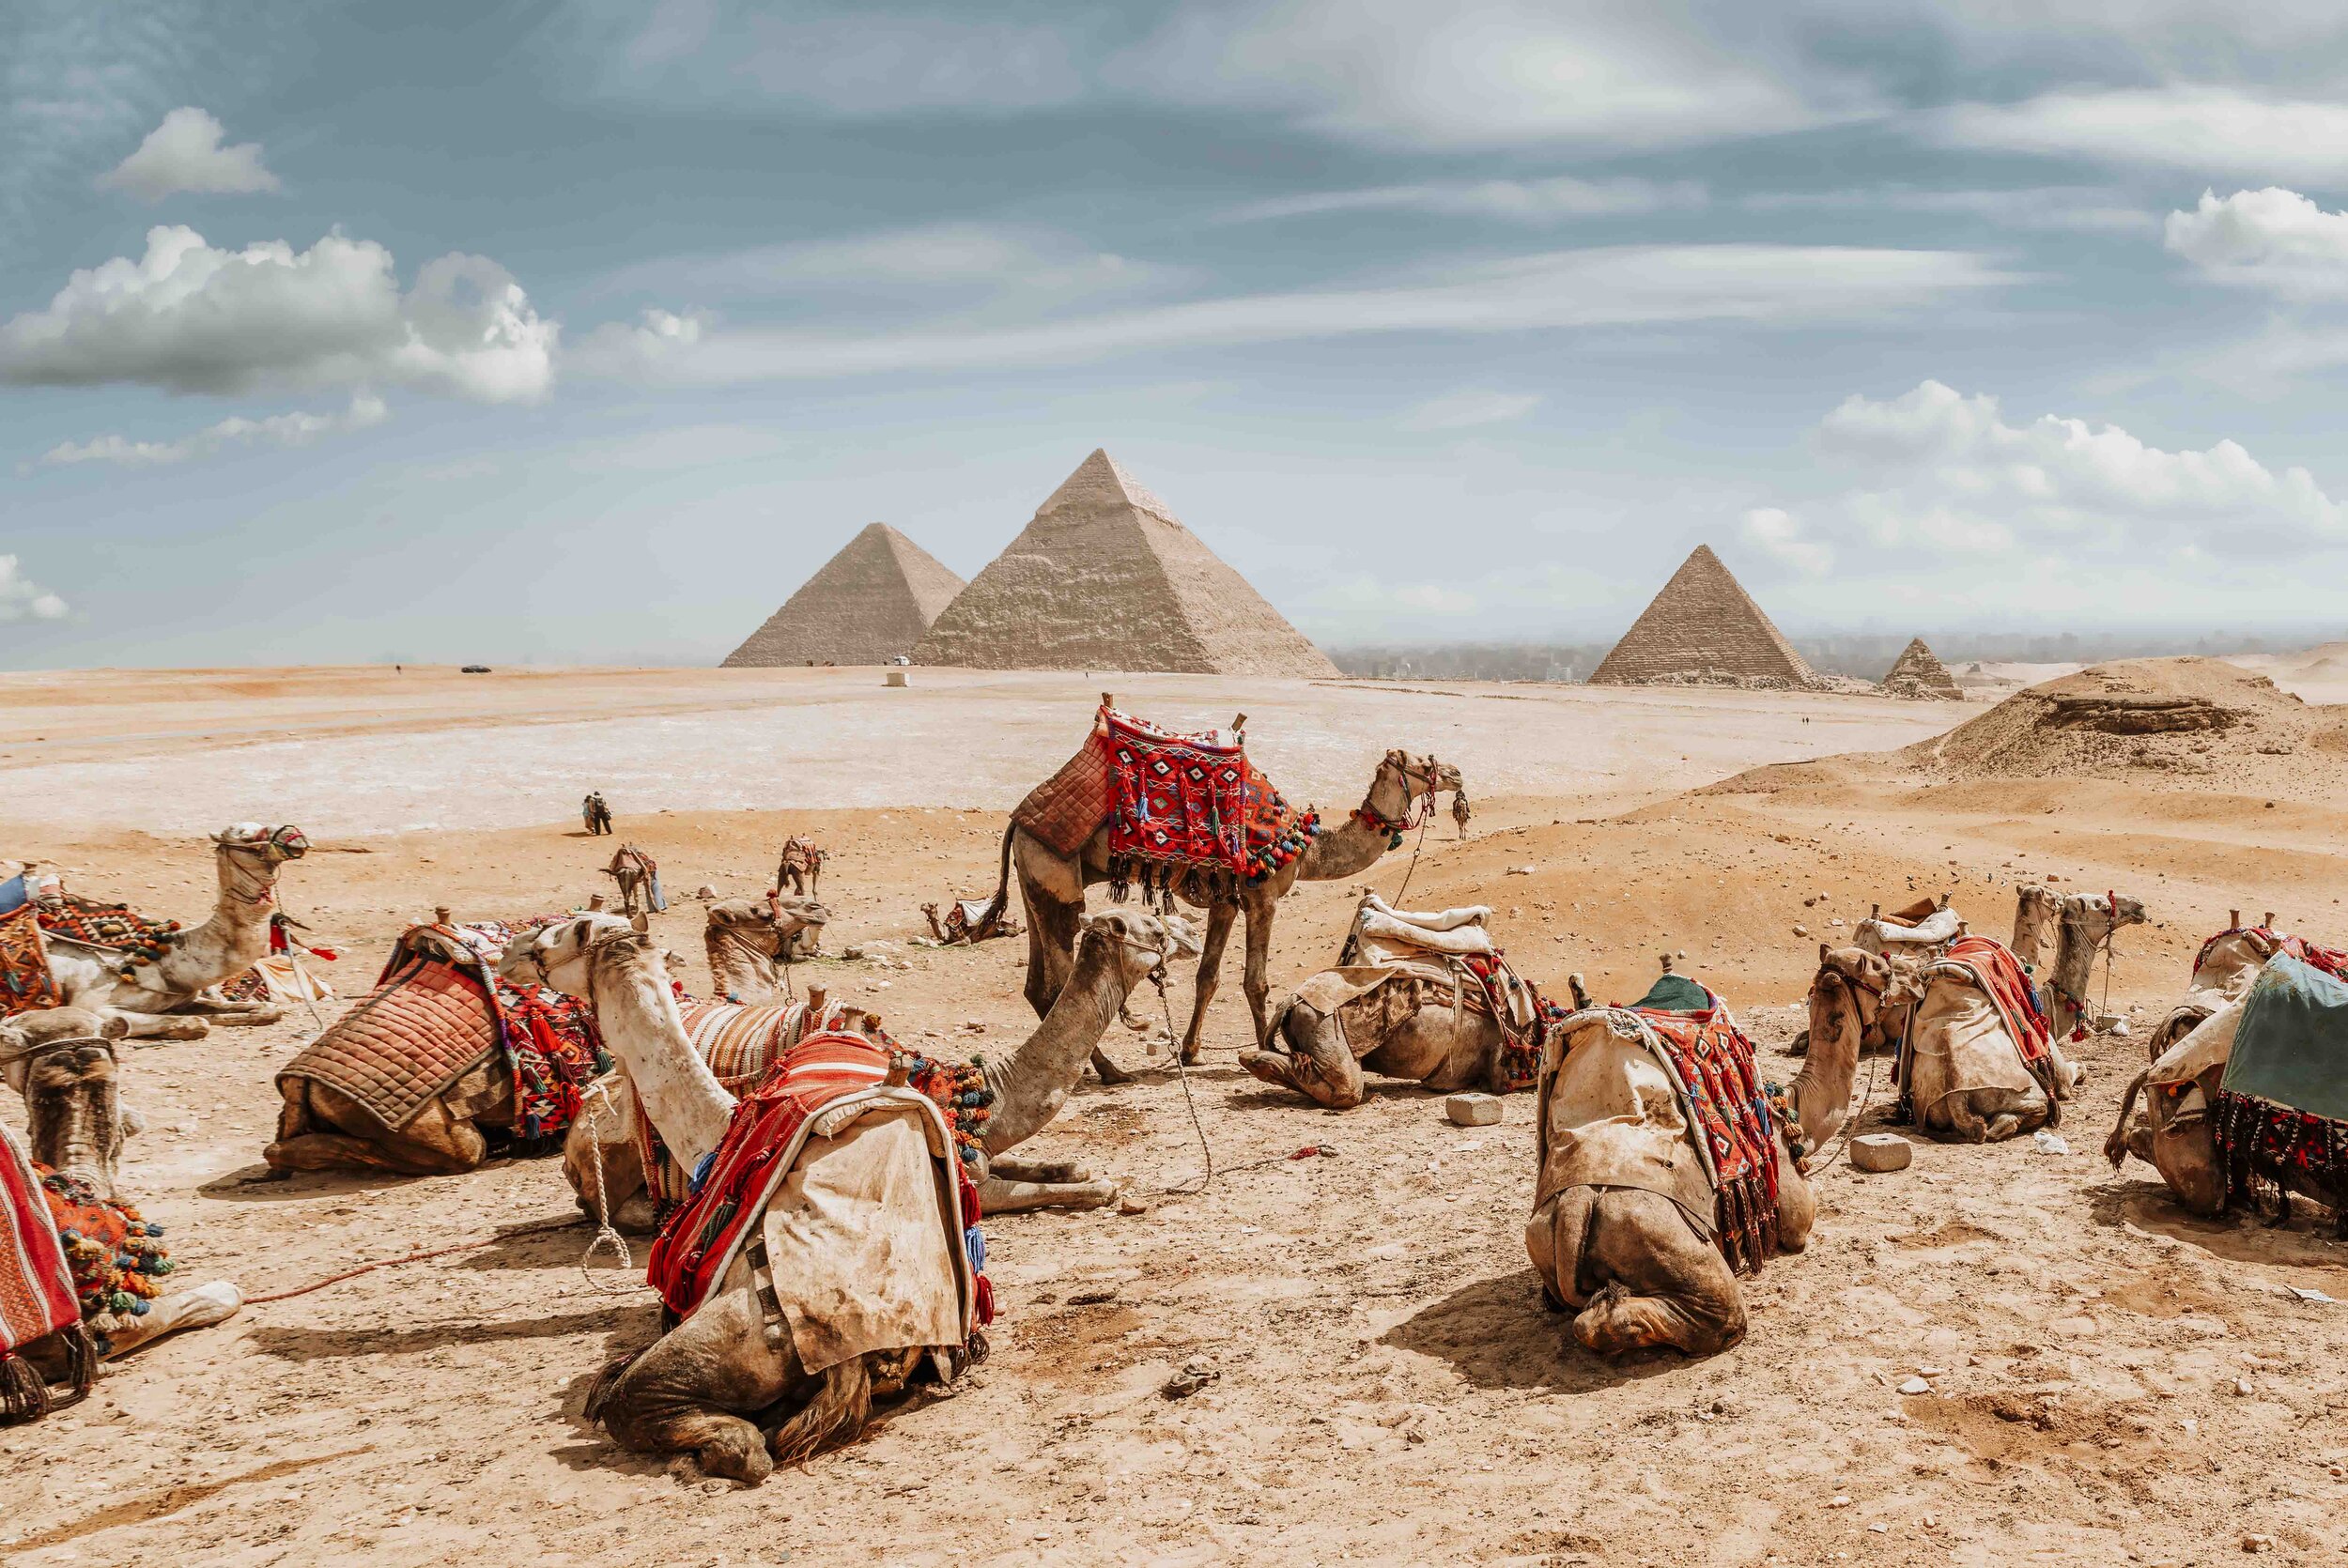 Camels in sandy desert near pyramids at day